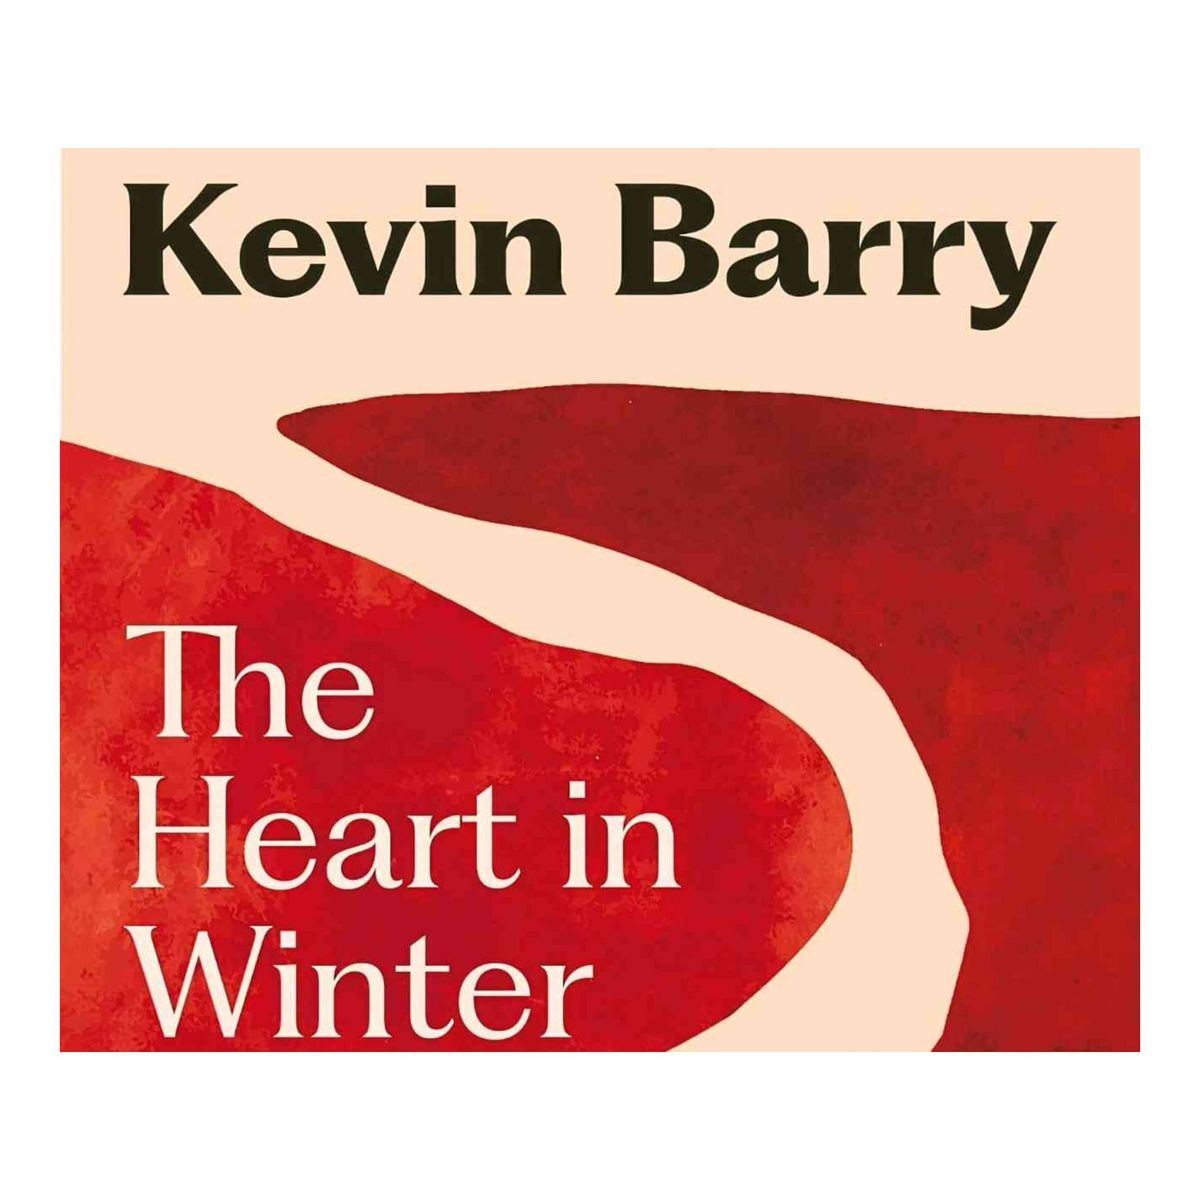 The Heart in Winter: An Evening with Kevin Barry